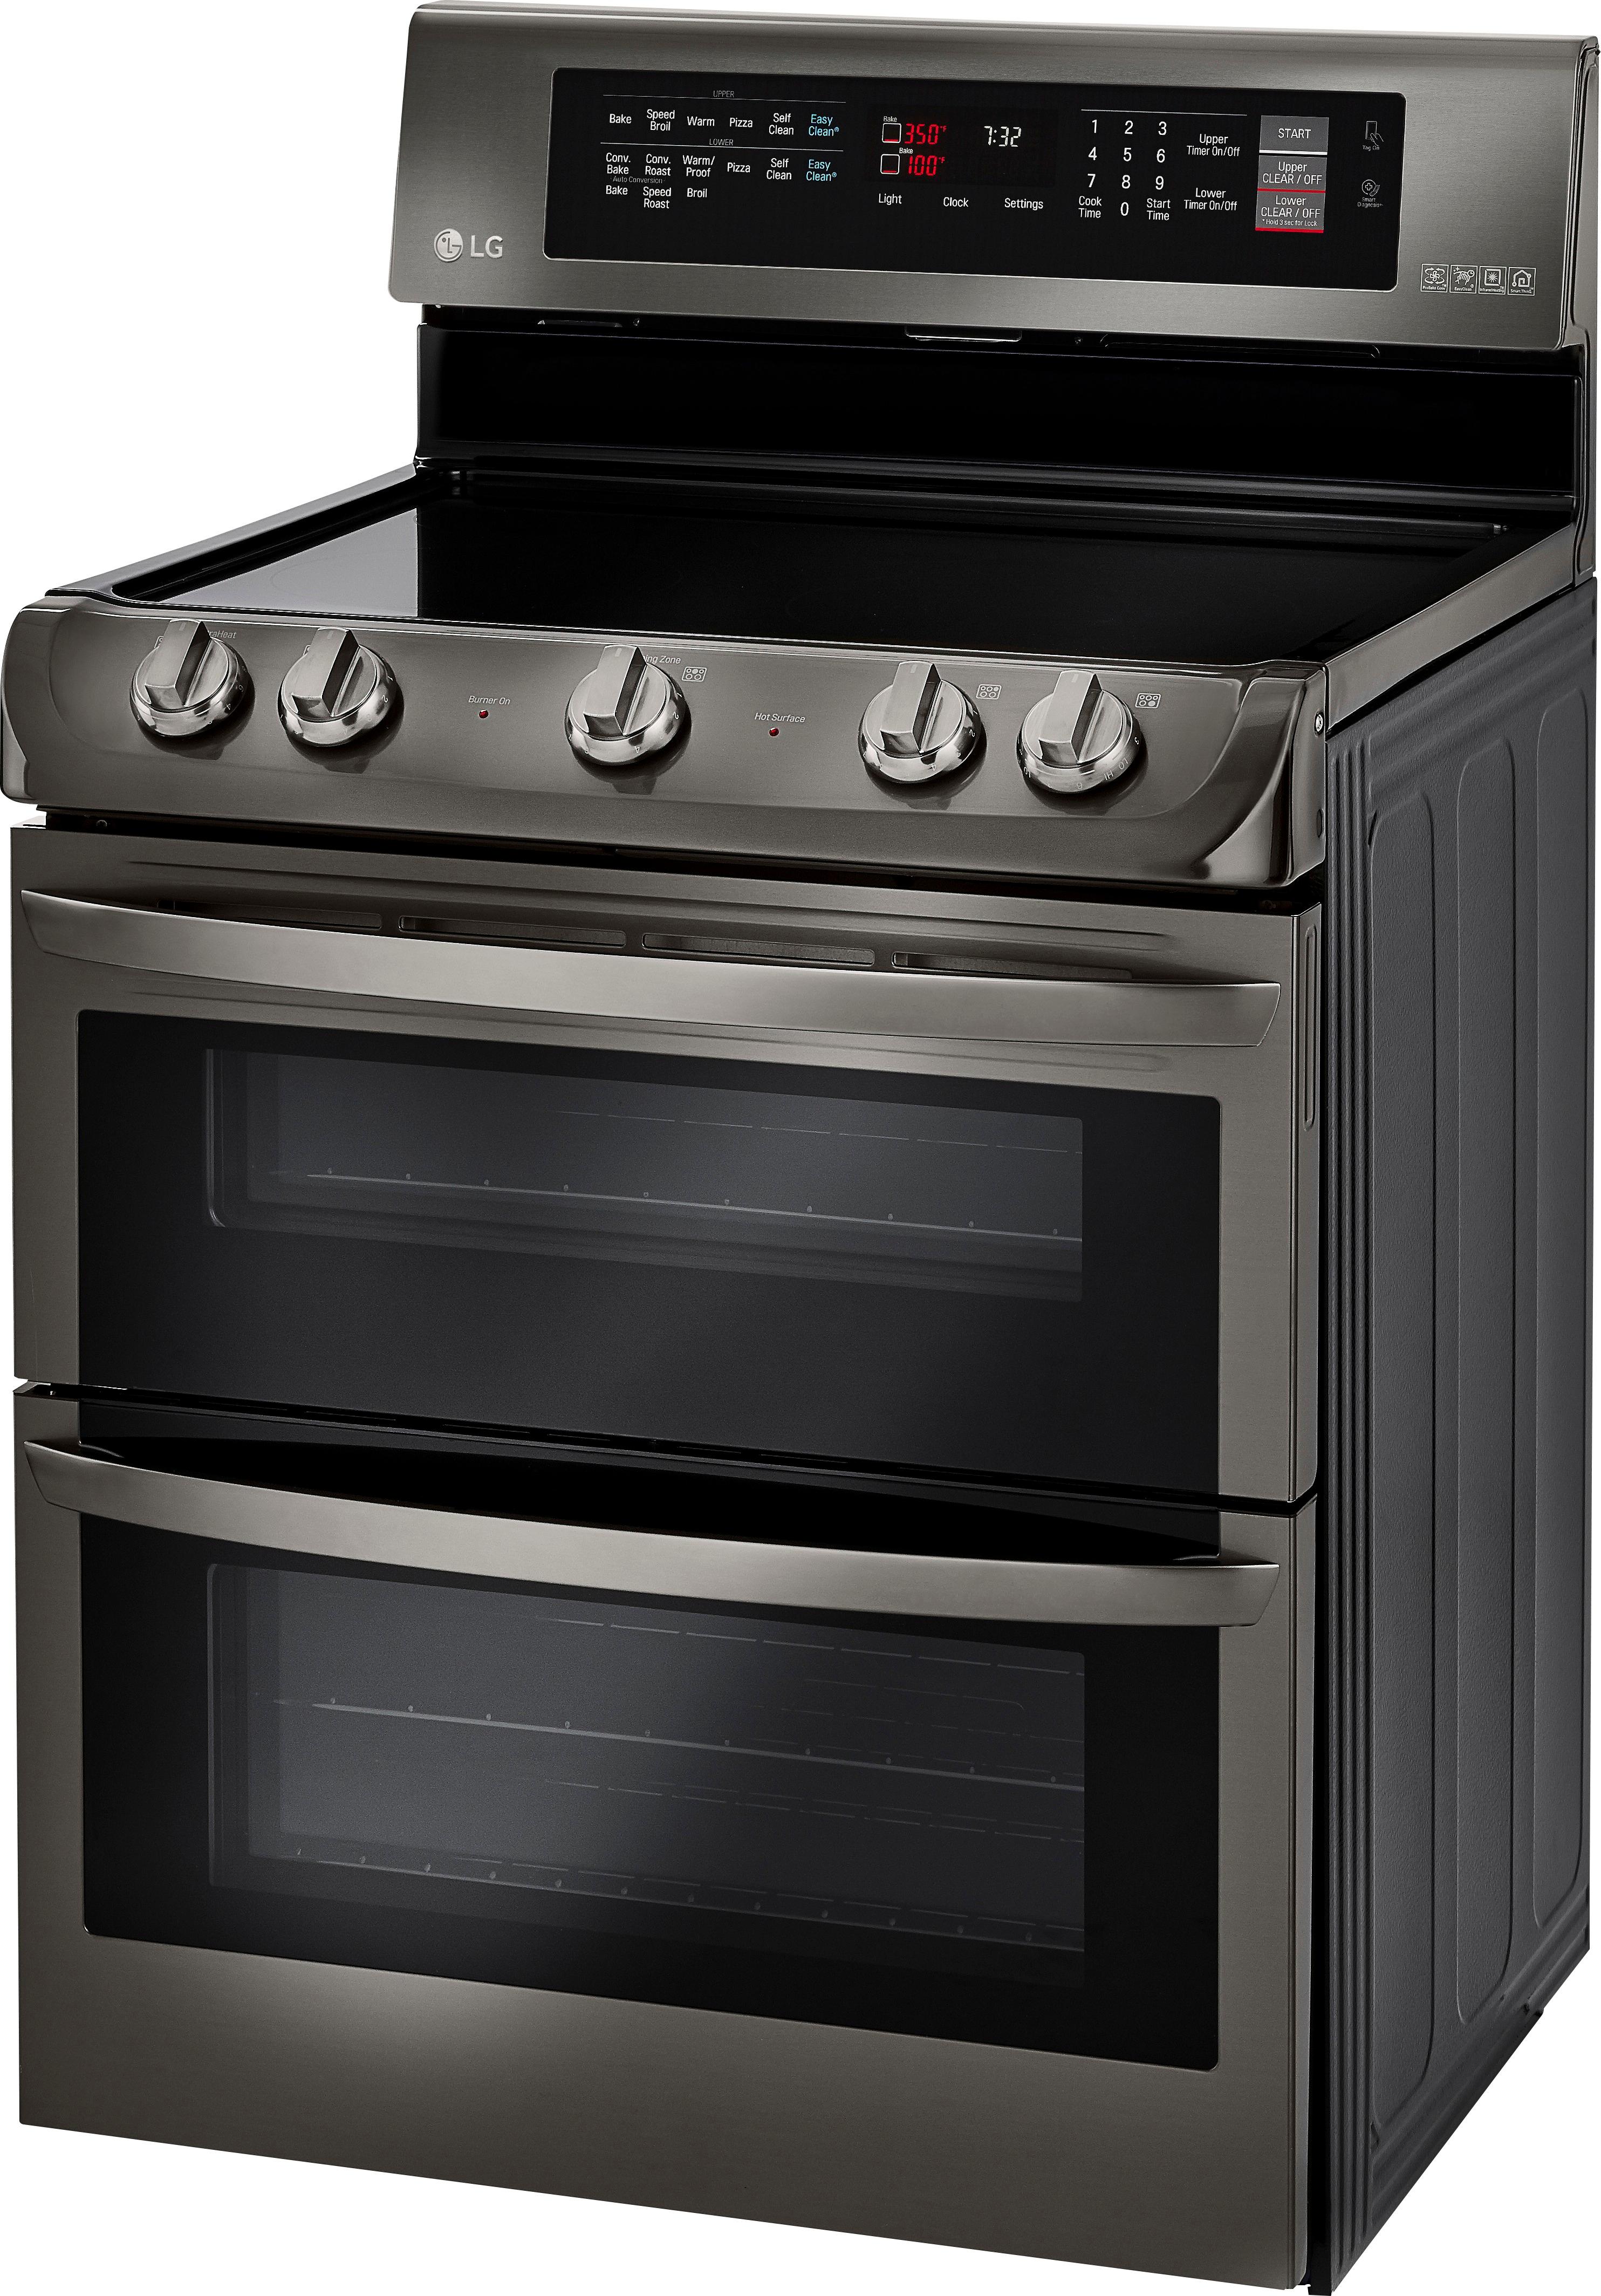 LG 7.3 Cu. Ft. Self-Cleaning Freestanding Double Oven Electric Range Electric Range Black Stainless Steel